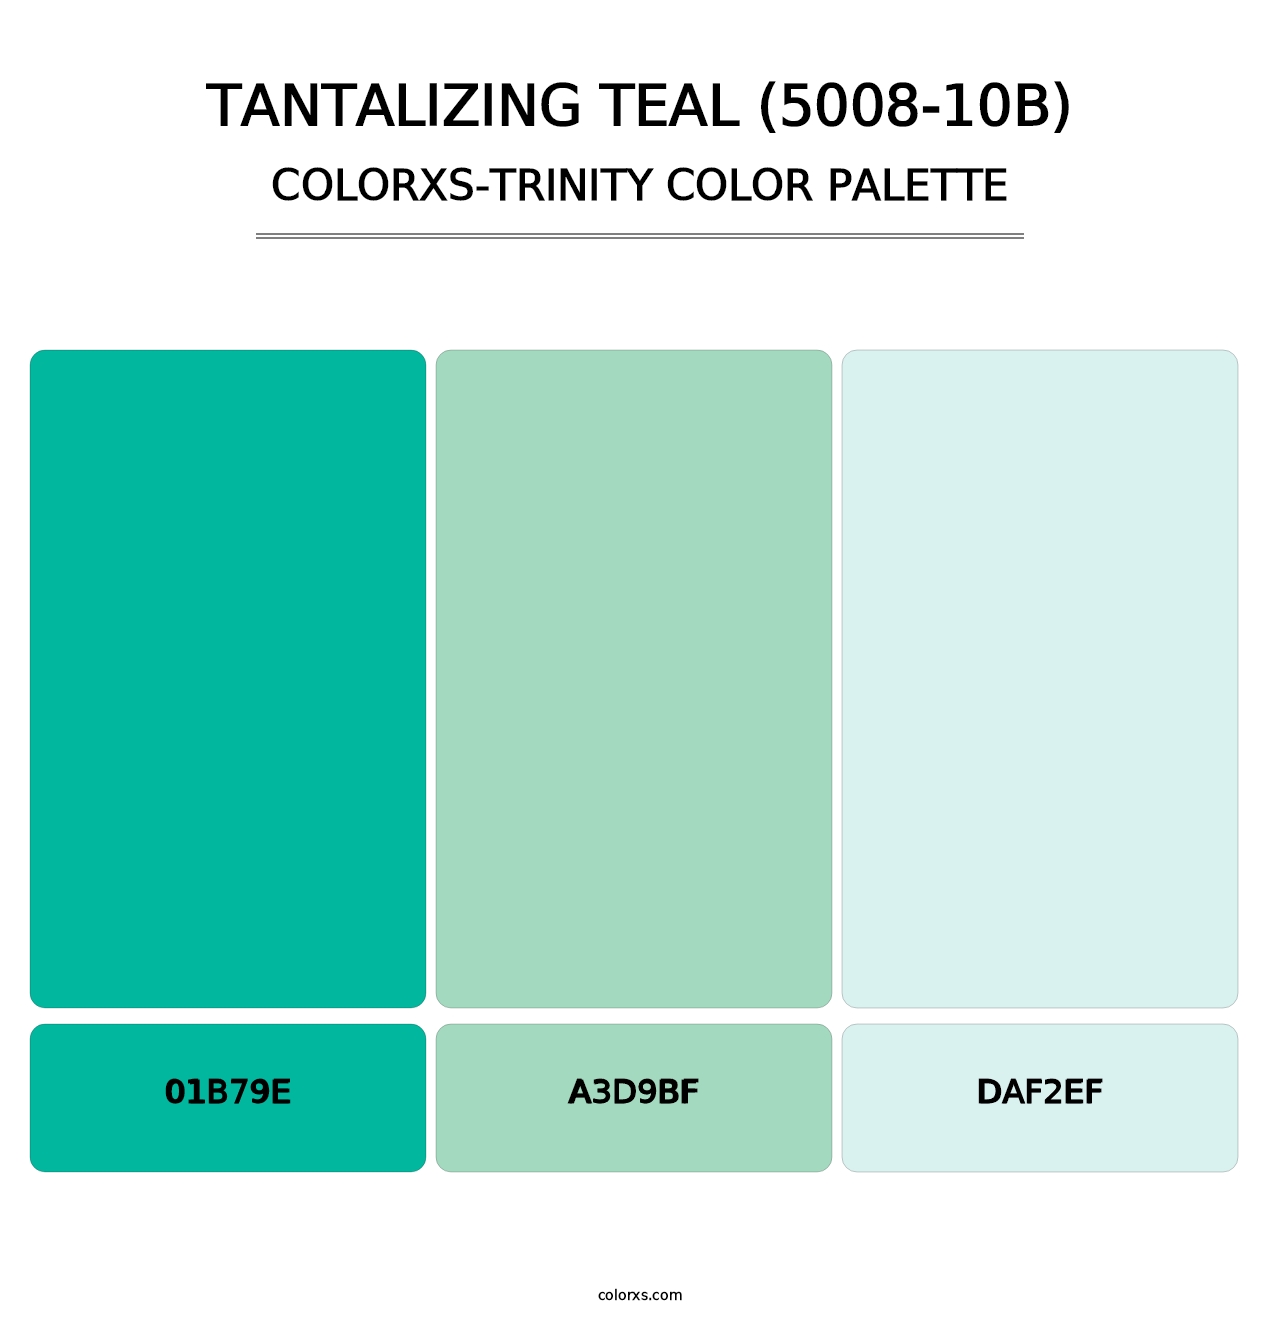 Tantalizing Teal (5008-10B) - Colorxs Trinity Palette